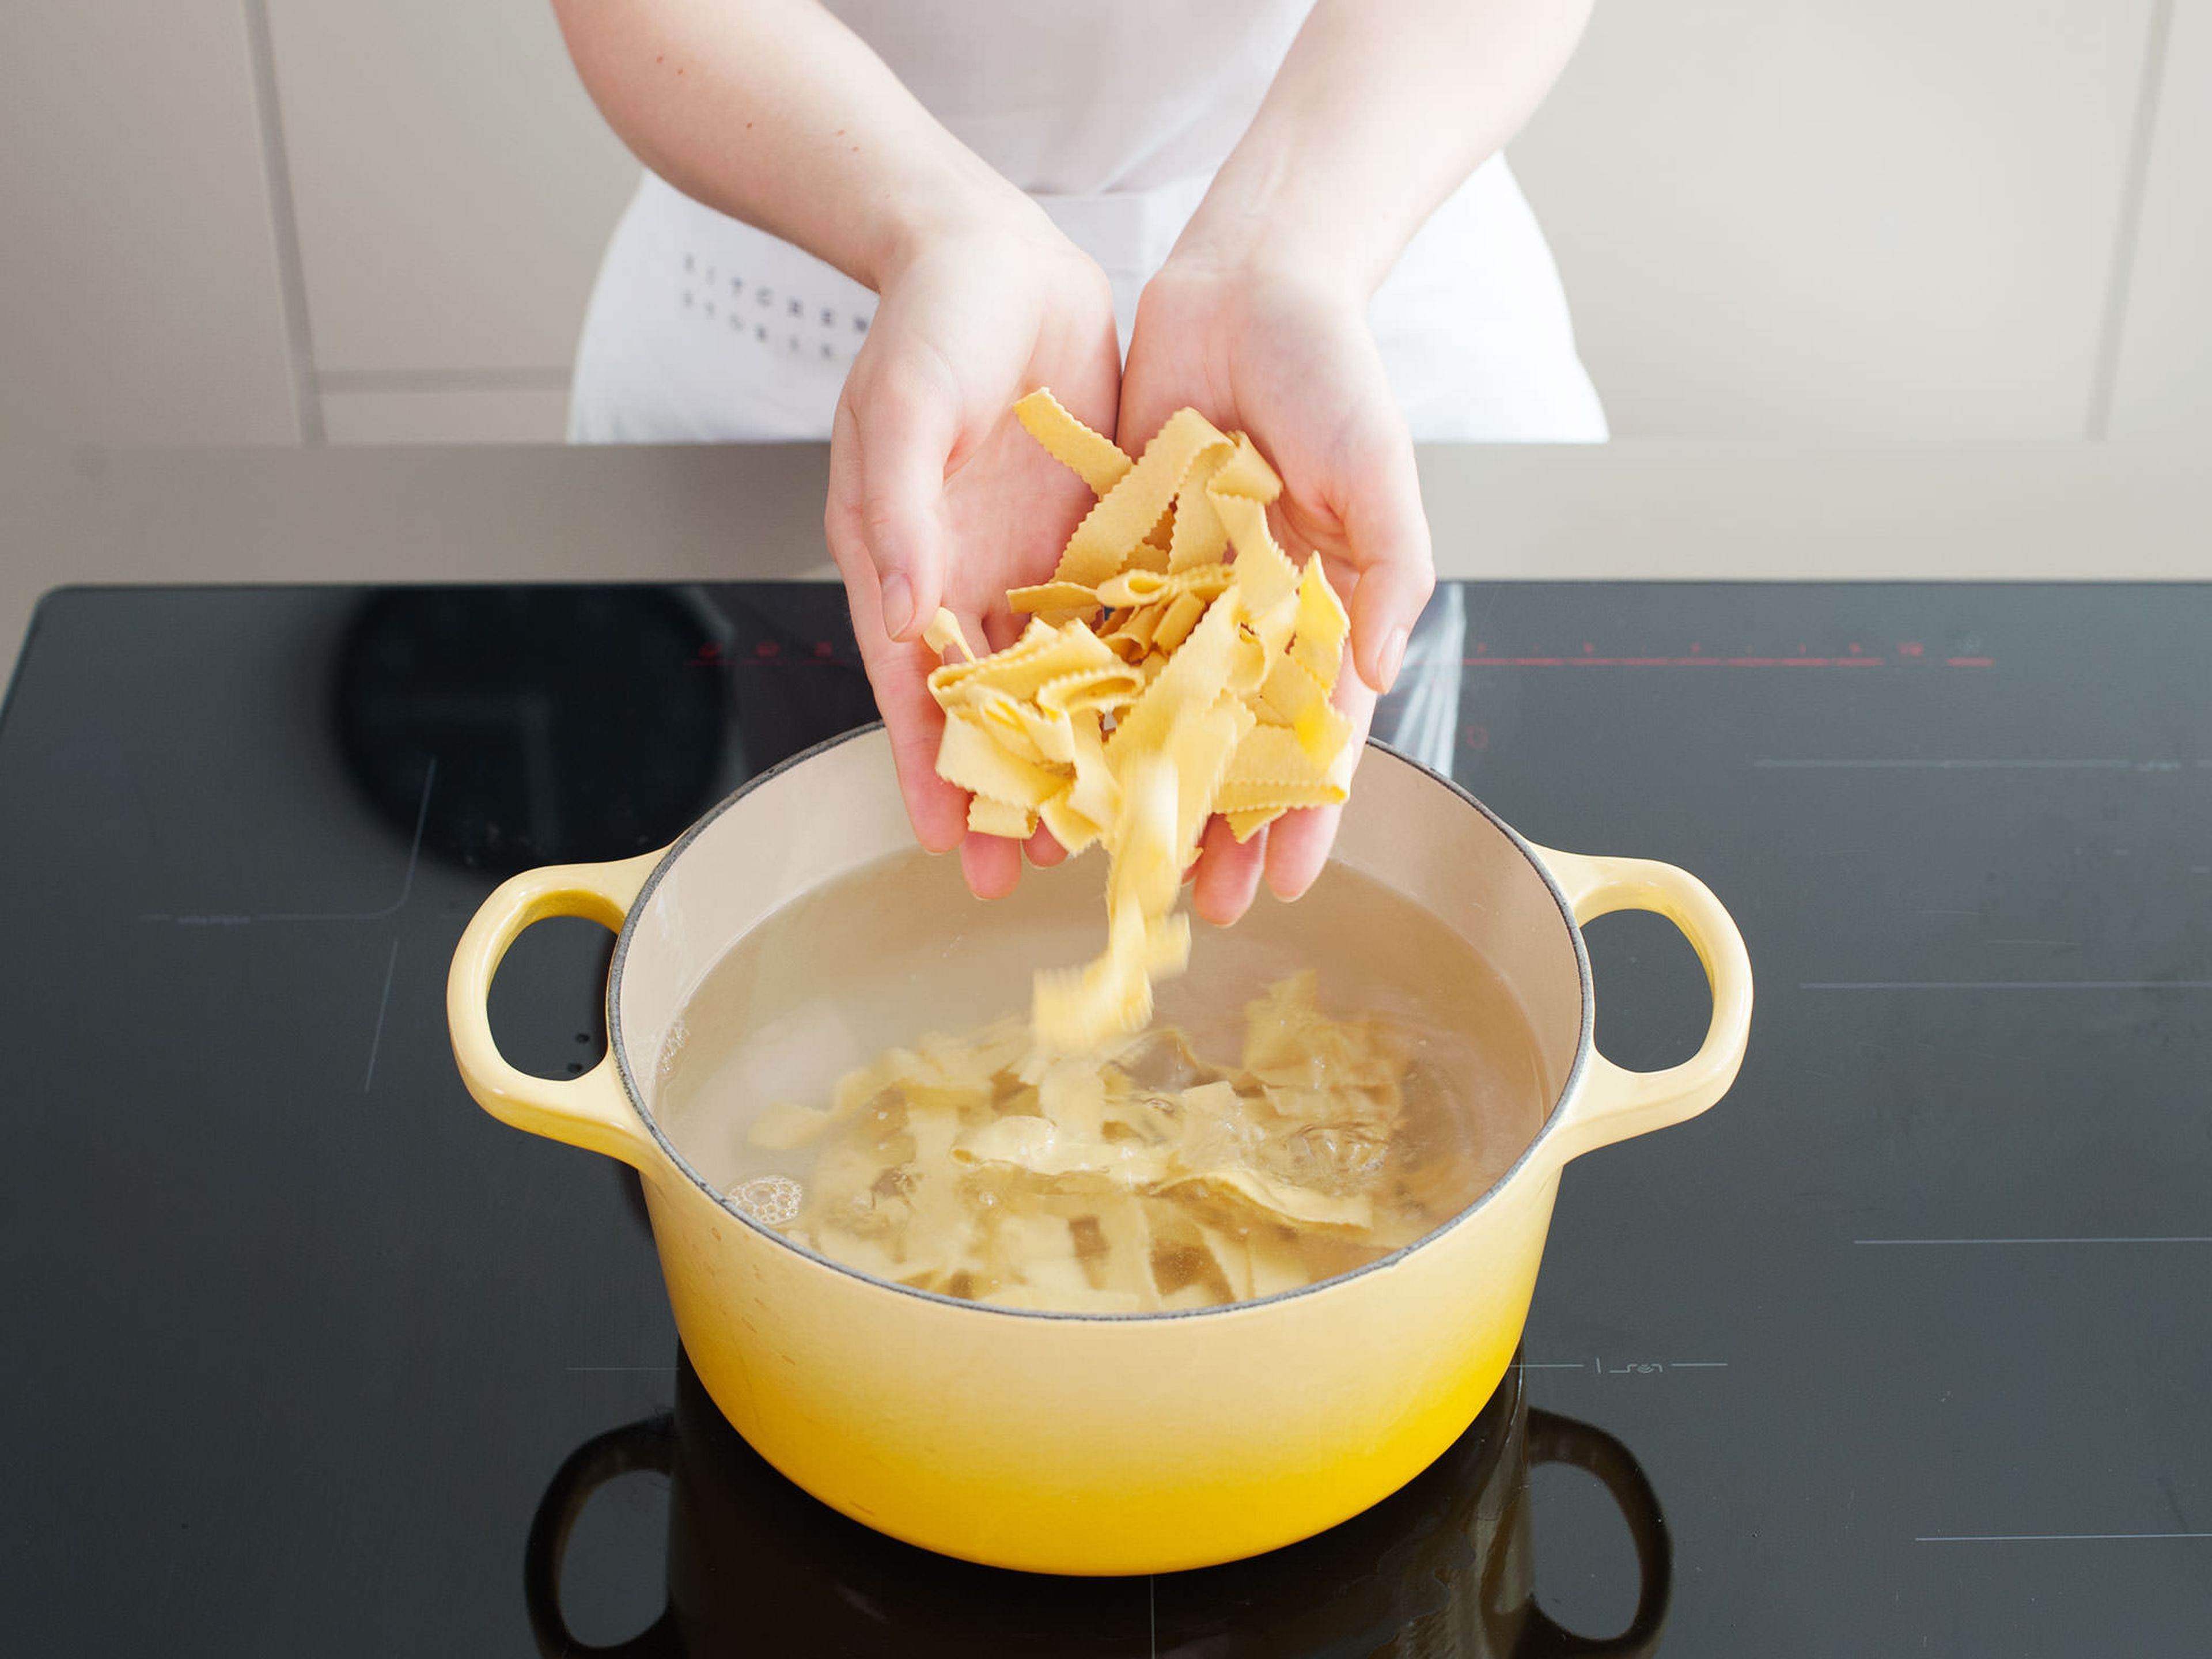 When almost ready to serve, boil pasta, according to package instructions, in salted water. If sauce is too thin, remove lid and turn slow cooker to high; sift in a little bit of flour, a tablespoon at a time, and stir to combine until thickened. Serve stew over tagliatelle and enjoy!